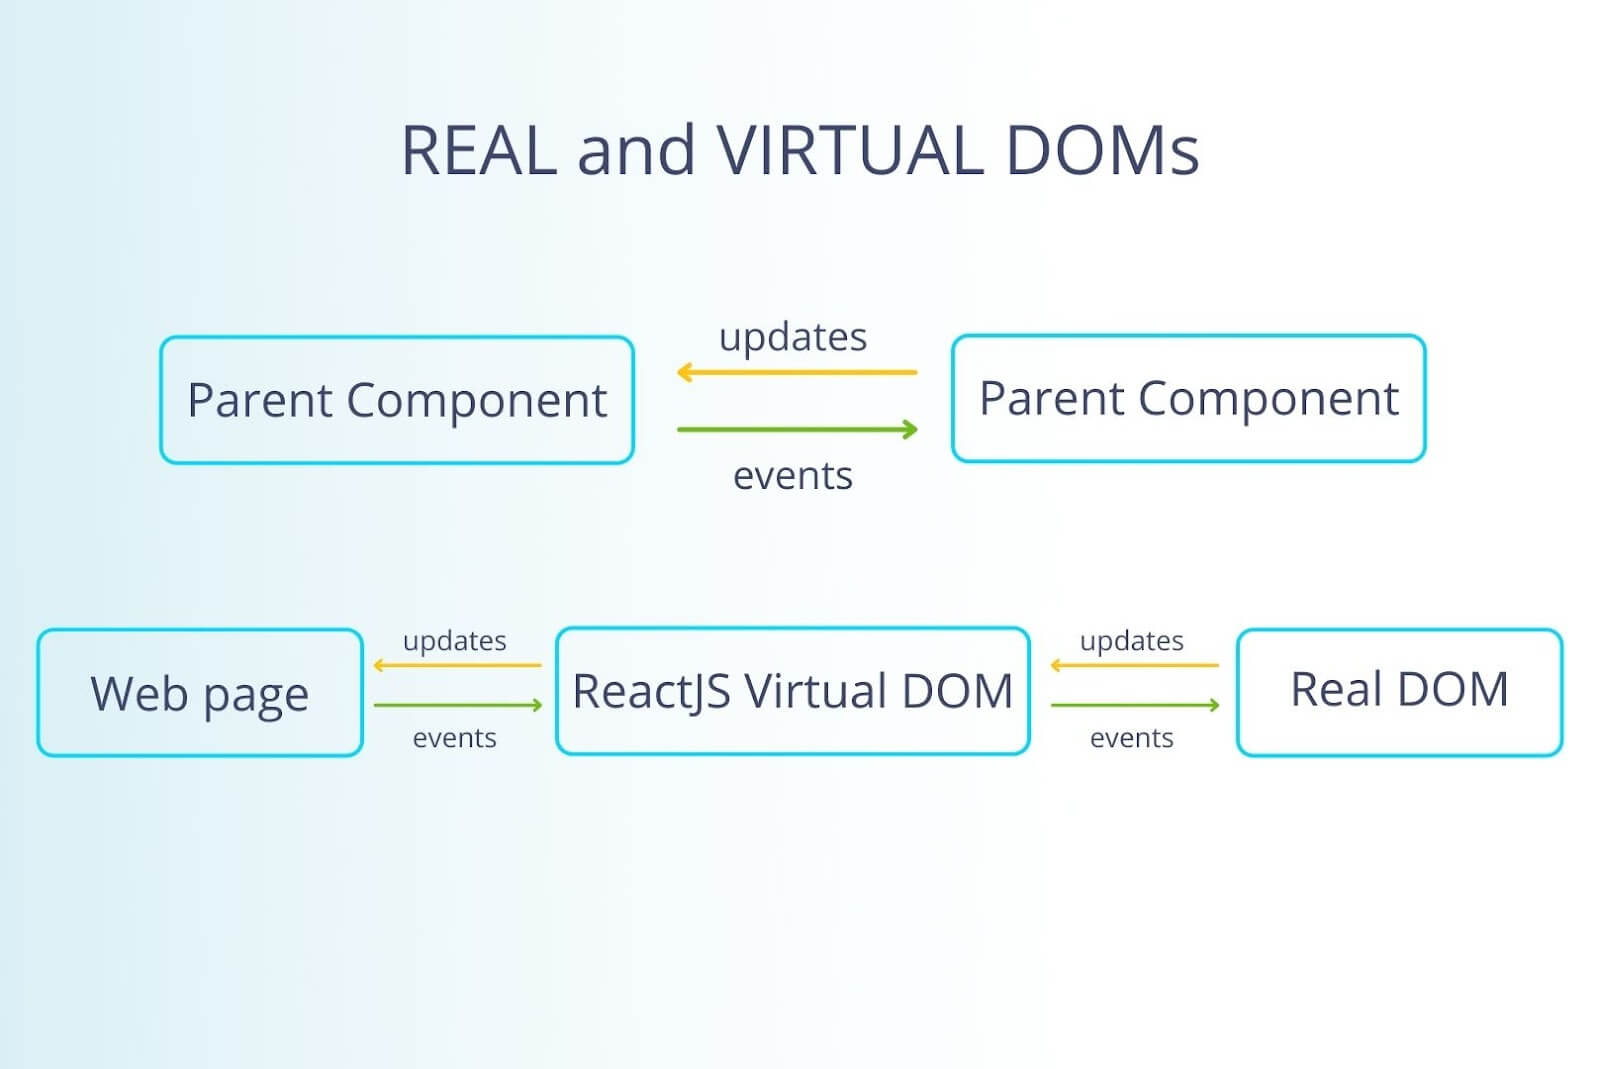 Real and Virtual DOMs